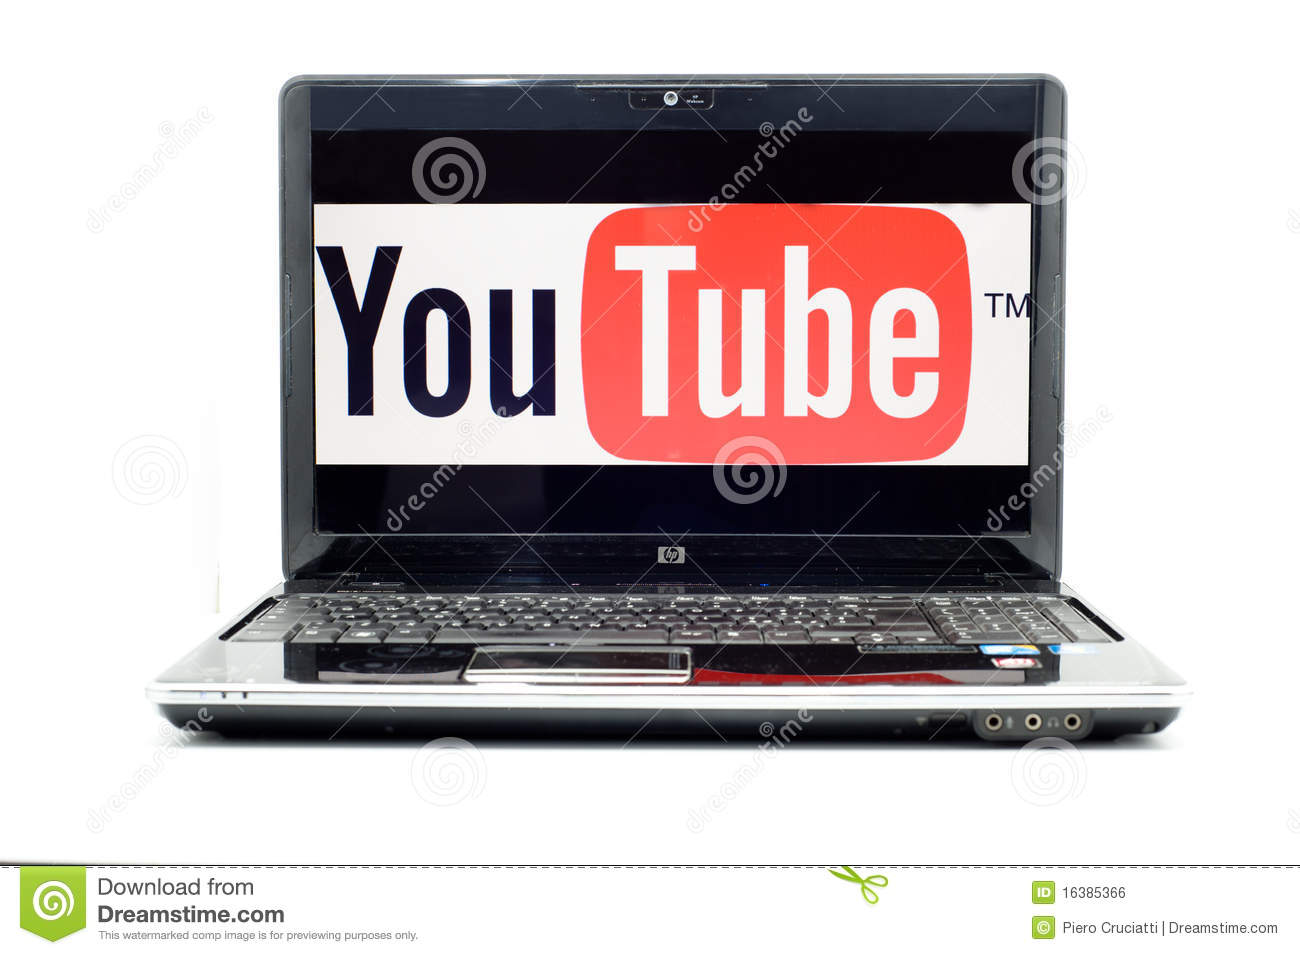 Youtube Logo On Hp Laptop  According To Youtube Fact Sheet People Are    